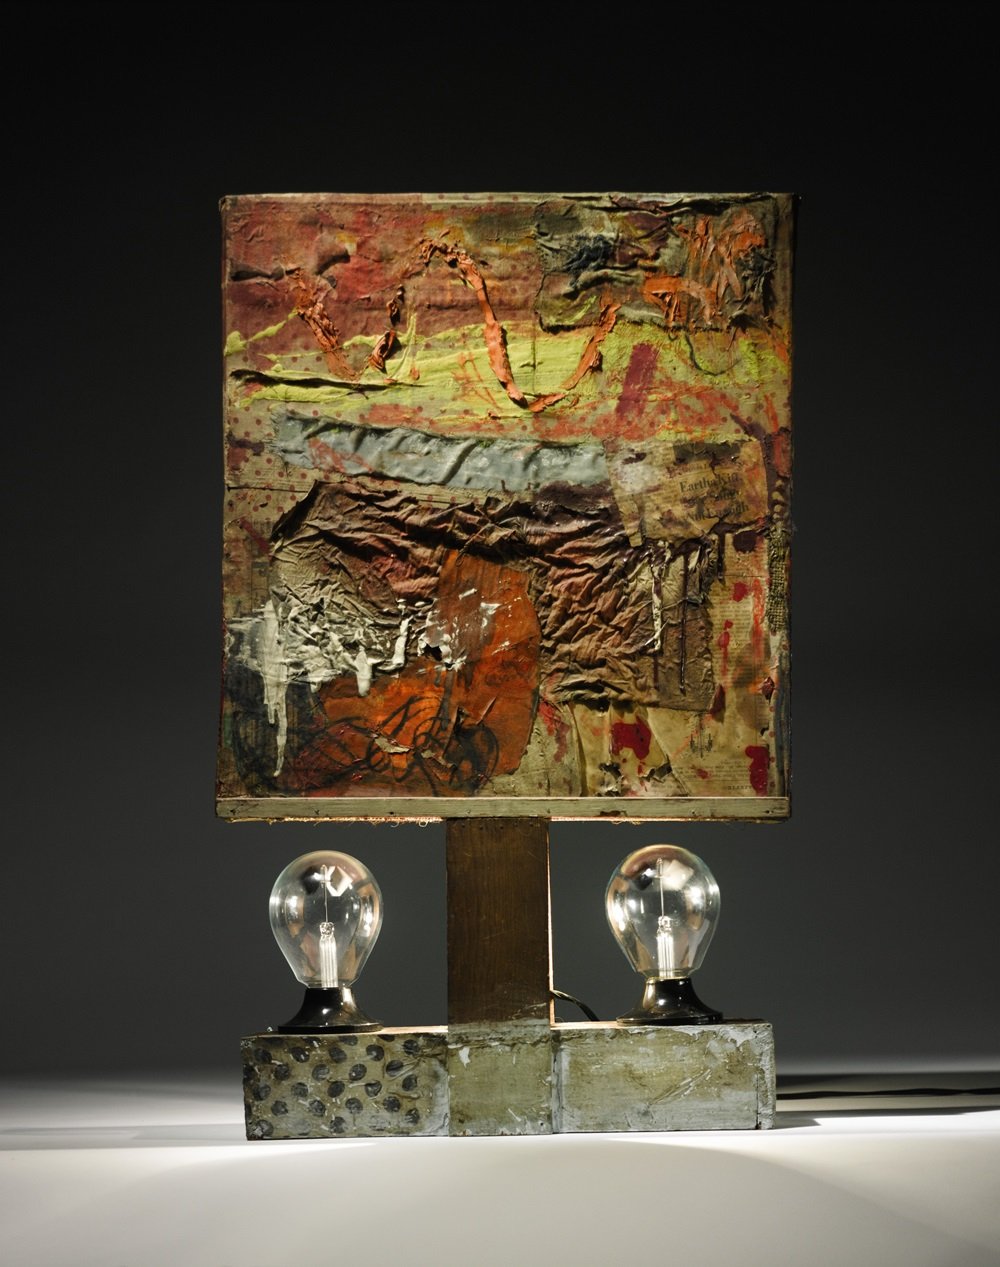 Lot 42 Robert Rauschenberg Combine oil, charcoal, newspaper, canvas and fabric collage, lightbulb and two Crookes radiometers on nailed wooden construction 25¾ x 14½ x 4 in. Est. $5/7 million